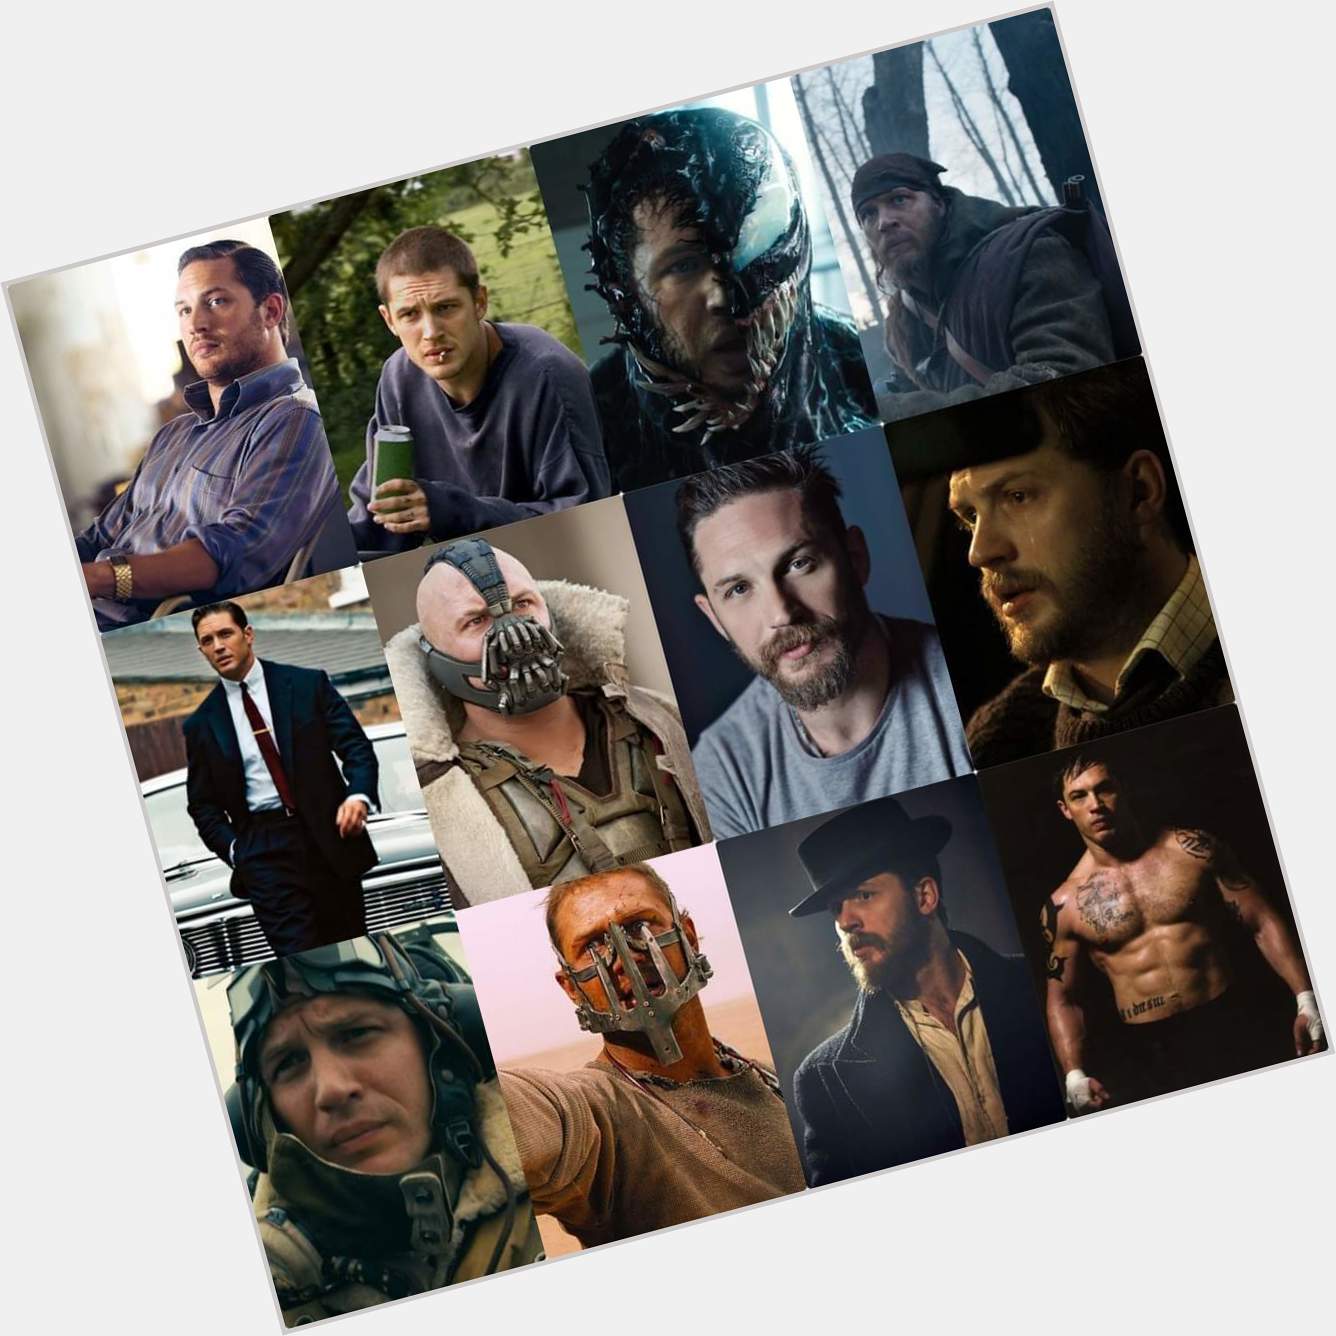 To the man who can act brilliantly just through his eyes and voice , Happy Birthday Tom Hardy   